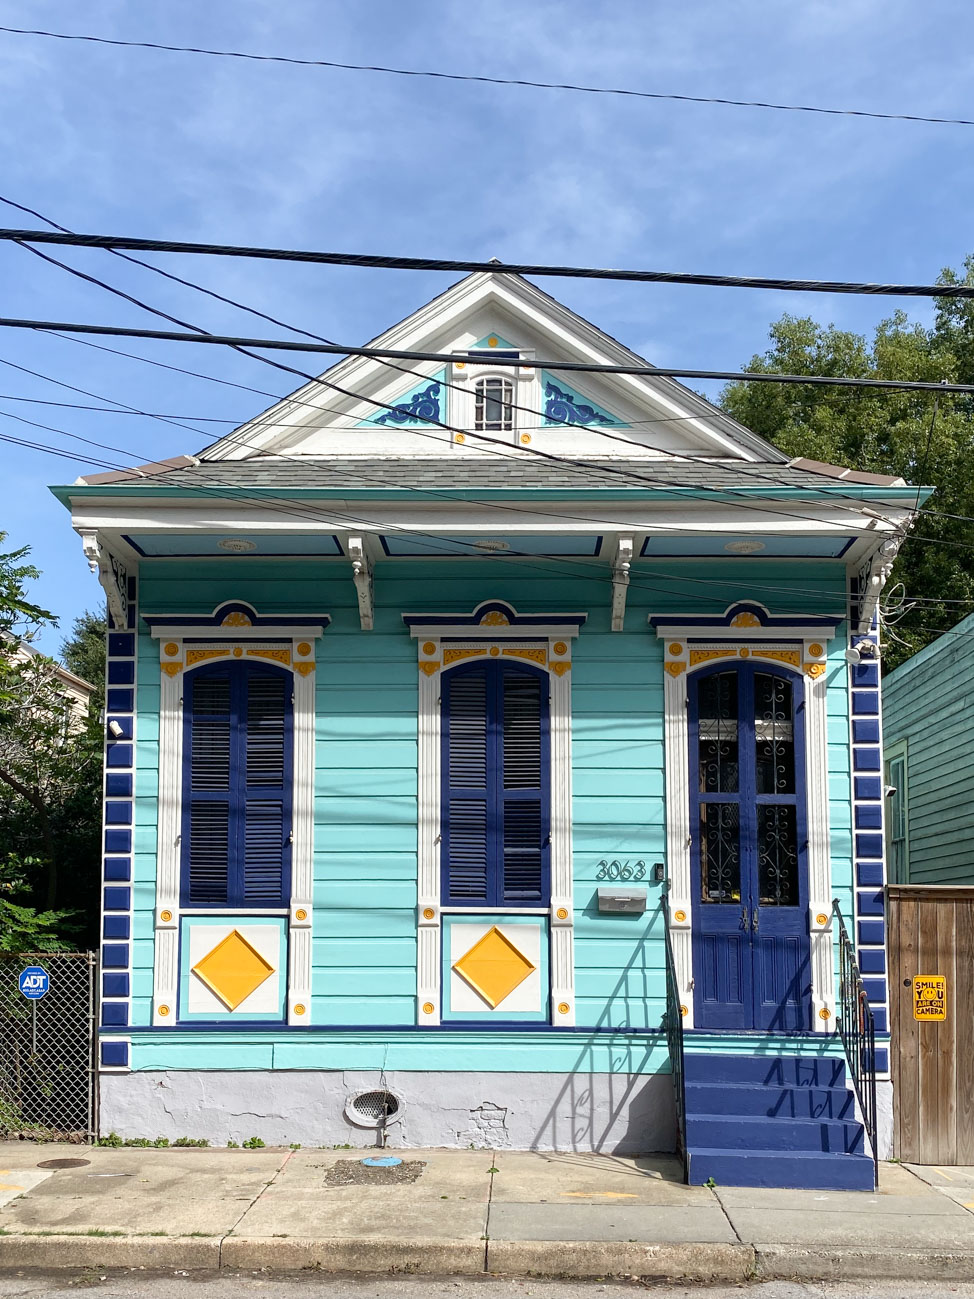 Bywater District in New Orleans